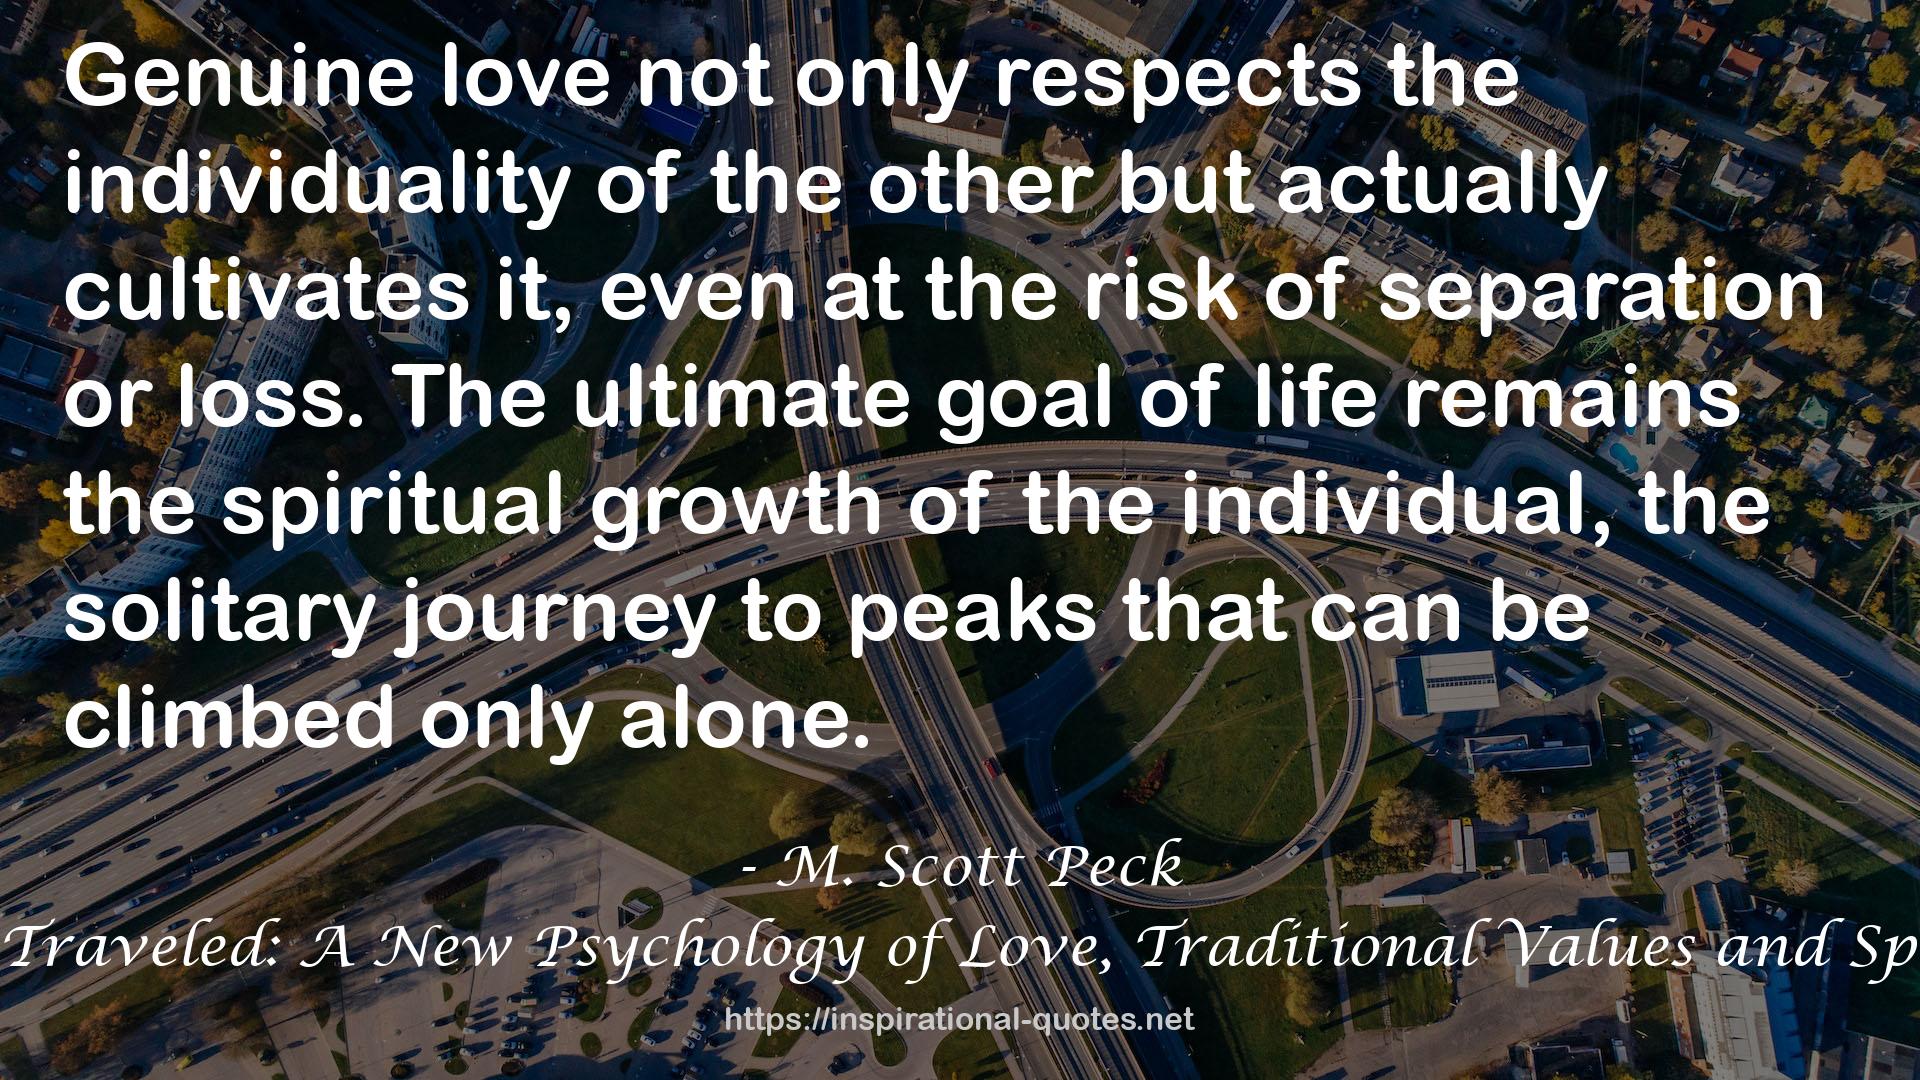 The Road Less Traveled: A New Psychology of Love, Traditional Values and Spiritual Growth QUOTES